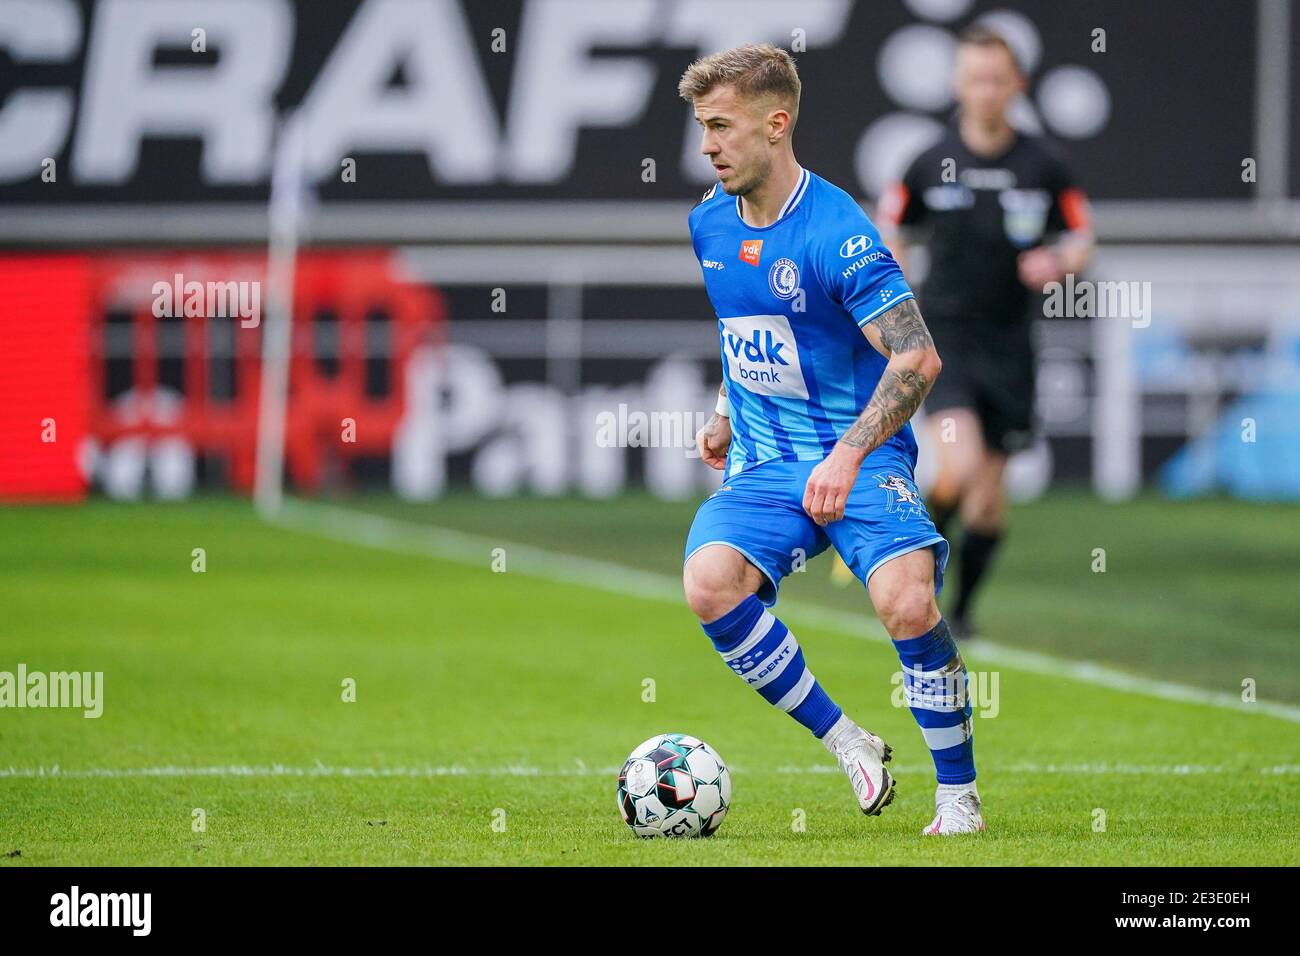 Ghent Belgium January 17 Niklas Dorsch Of Kaa Gent During The Pro League Match Between Kaa Gent And Royal Antwerp Fc At Ghelamco Arena On January Stock Photo Alamy